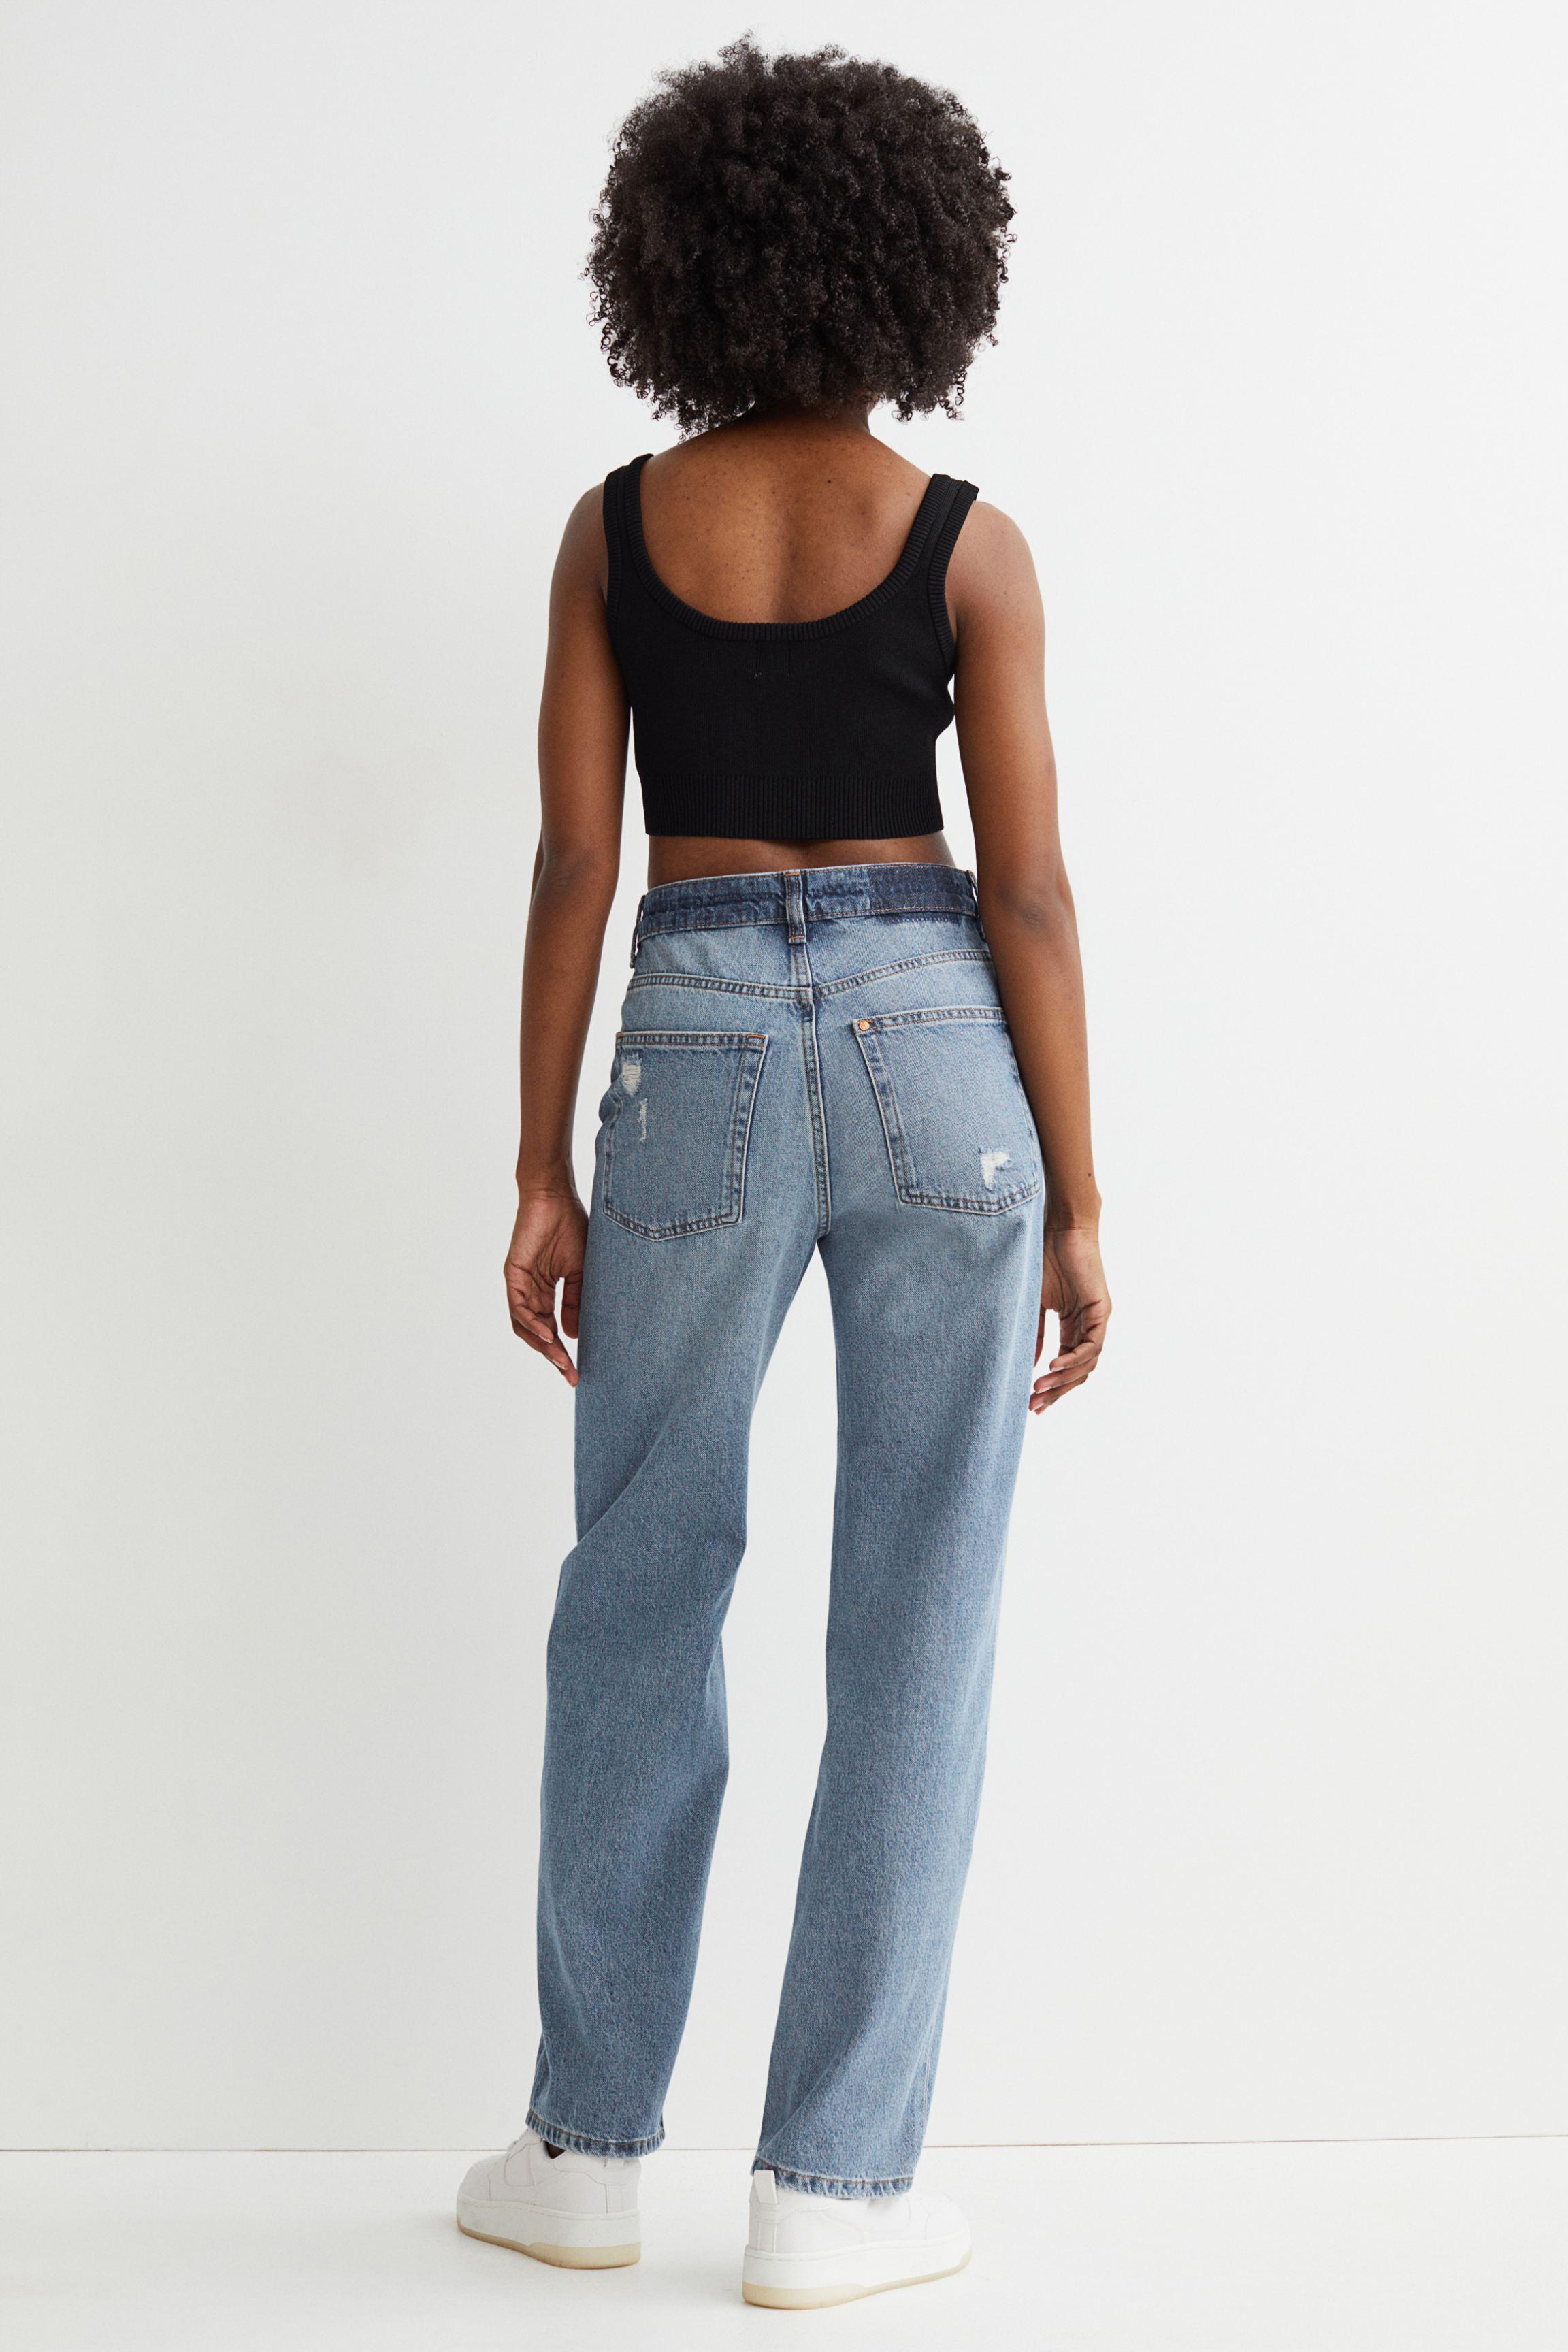 H&M Denim Loose Straight High Jeans in Blue - Lyst